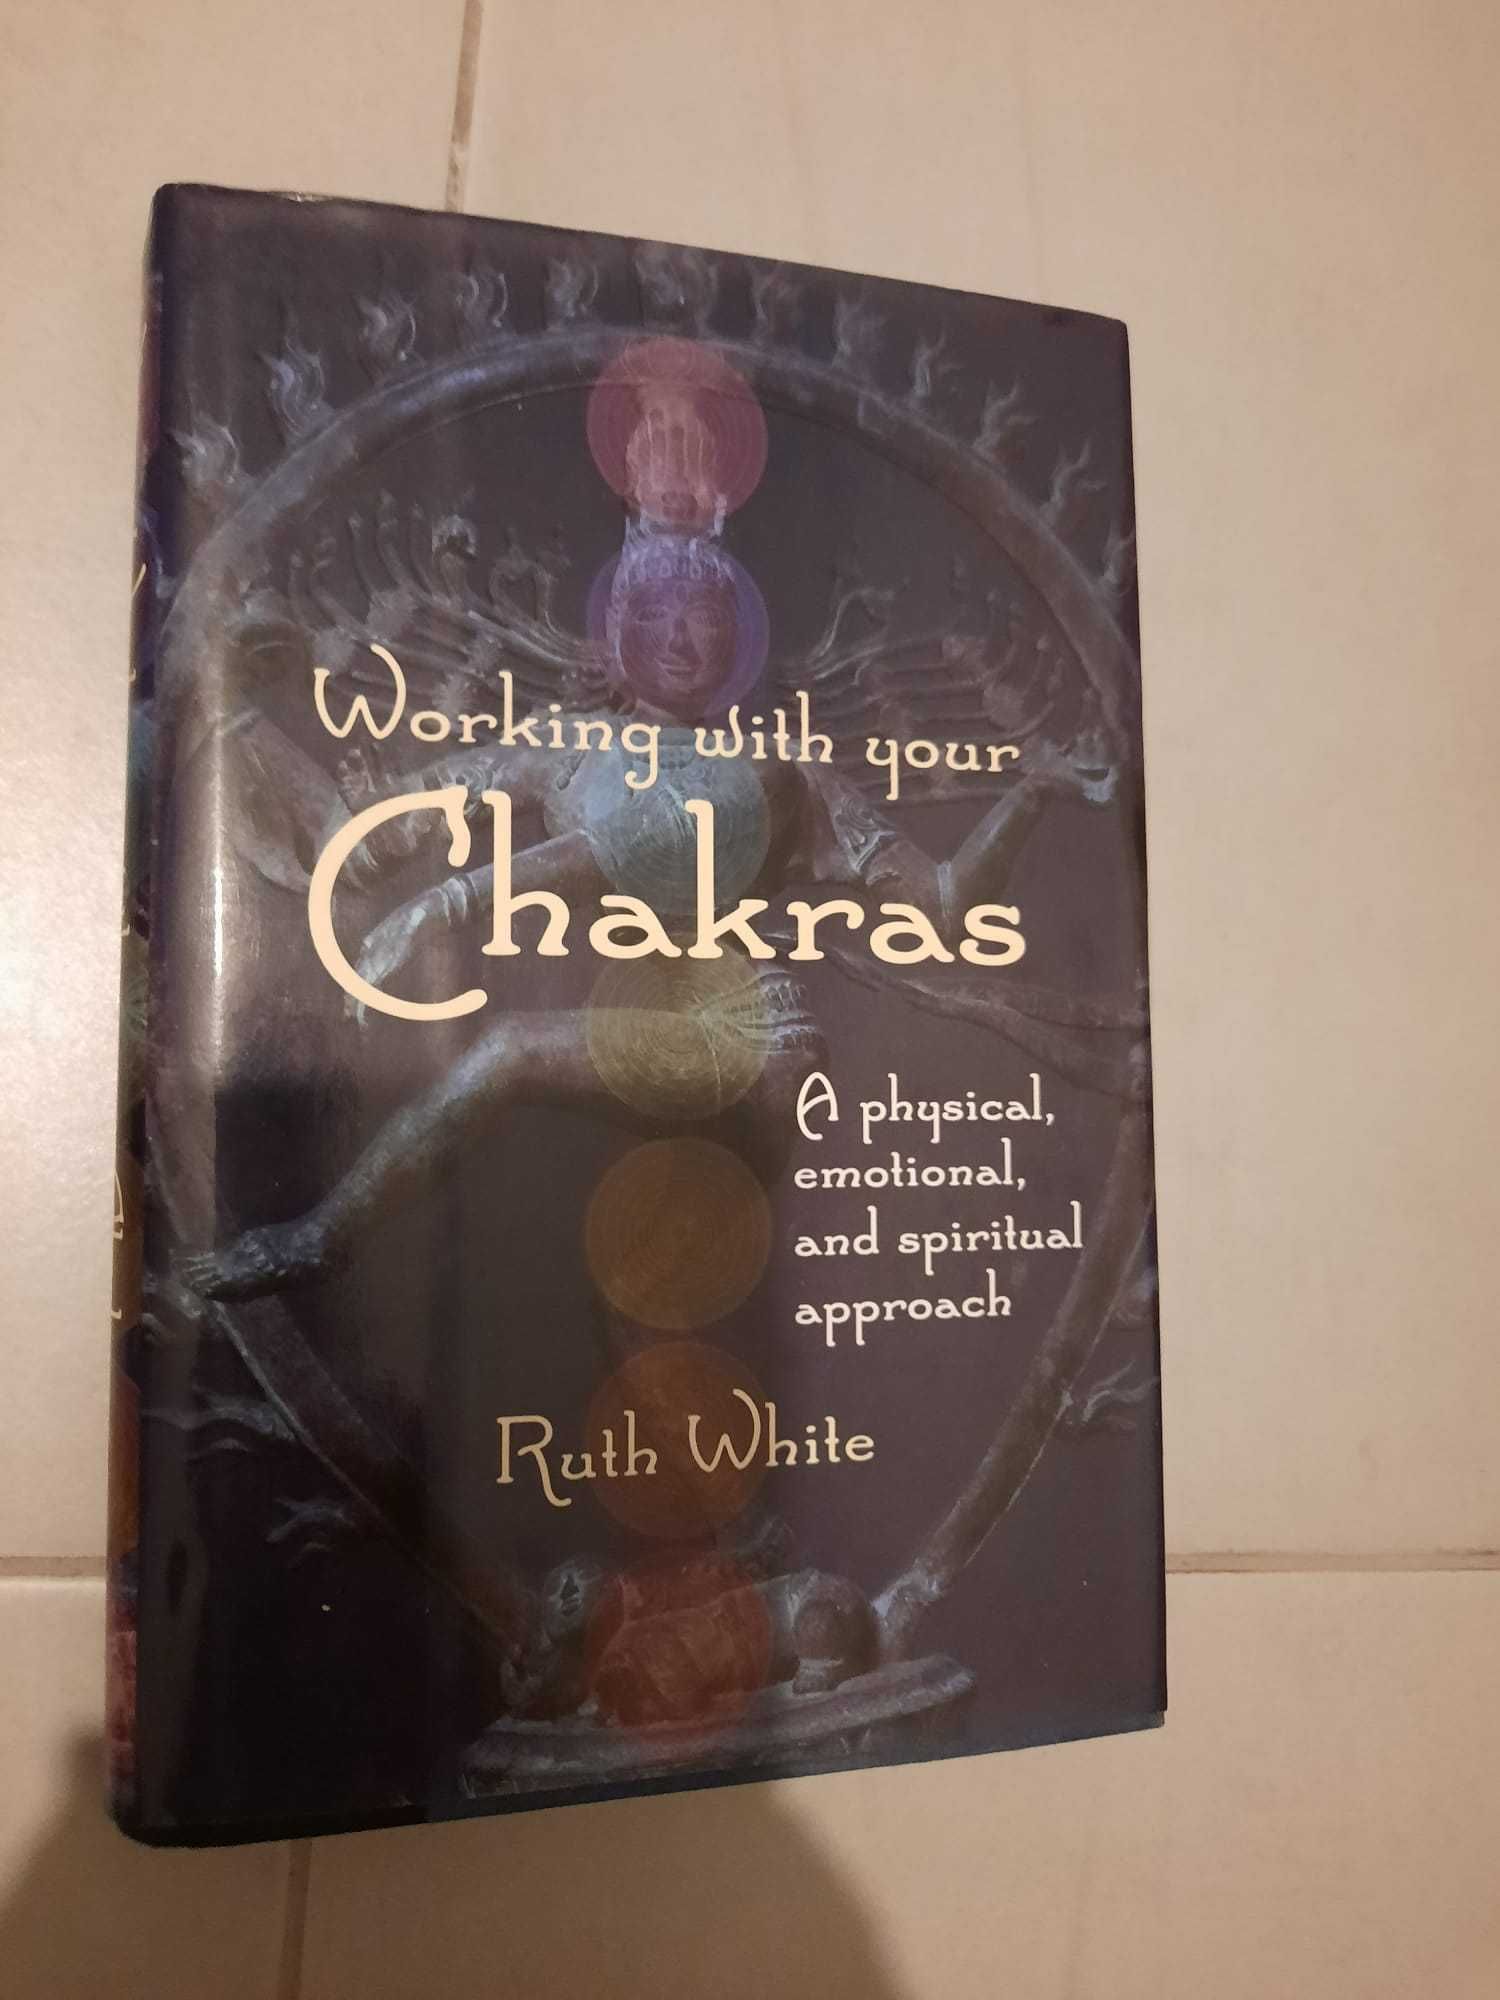 Working With Your Chakras (portes grátis)